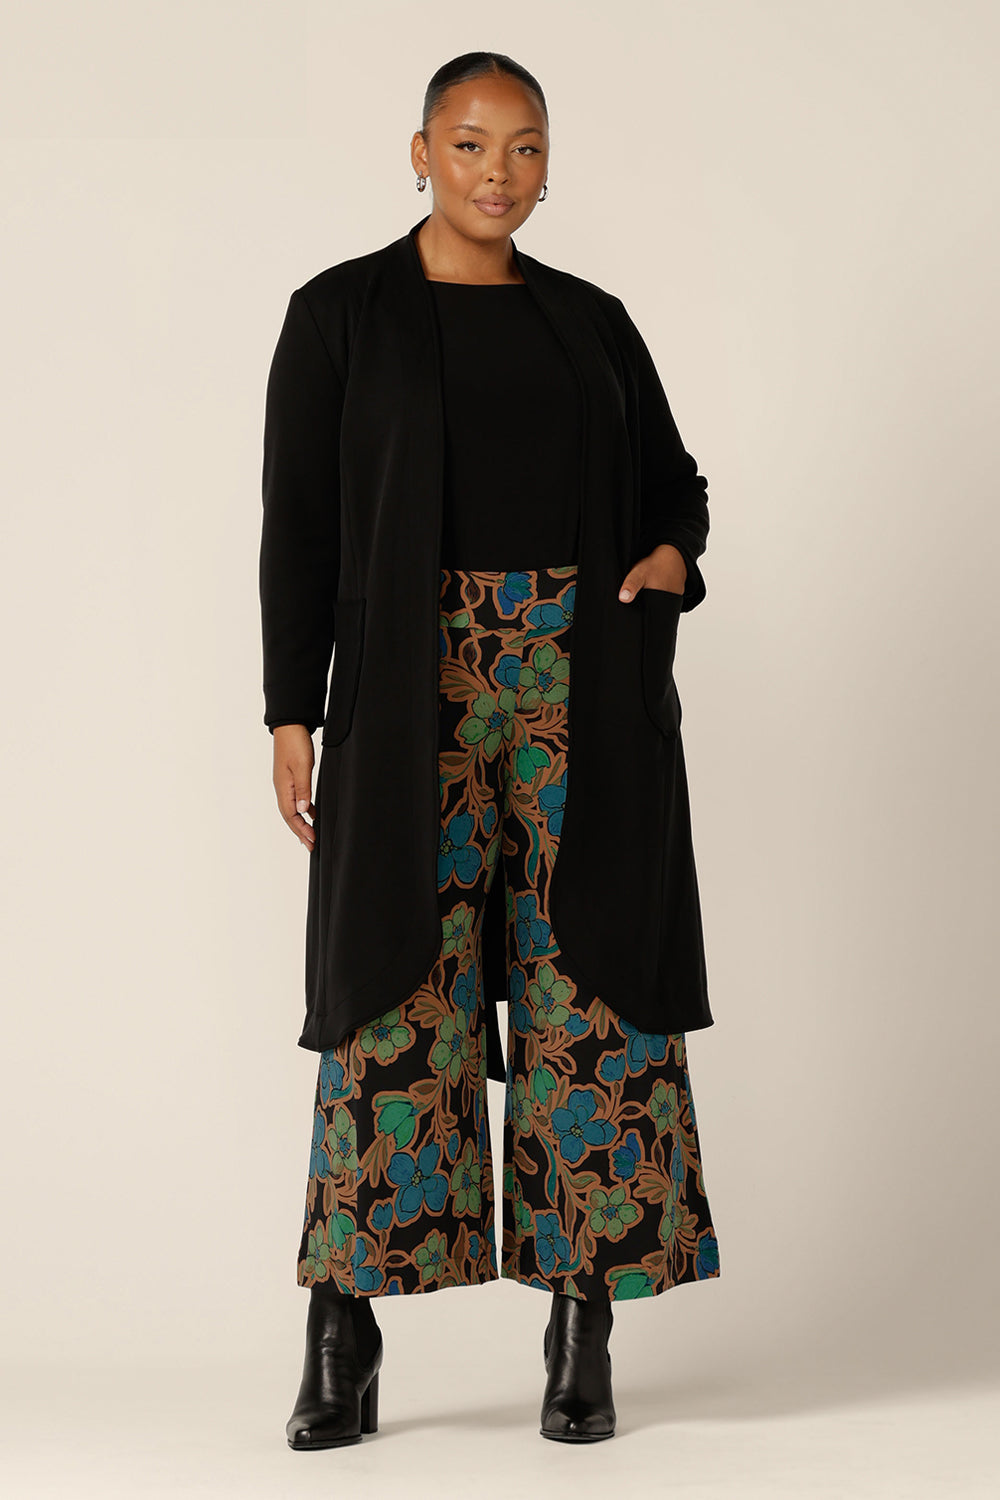 Great for chic city style, this black coat layers well as a commuter work wear and coat for travel. Worn by a fuller figure, size 18 woman, this softly tailored black trenchcoat in modal fabric is worn with printed jersey, wide leg pants and a black boat neck top.